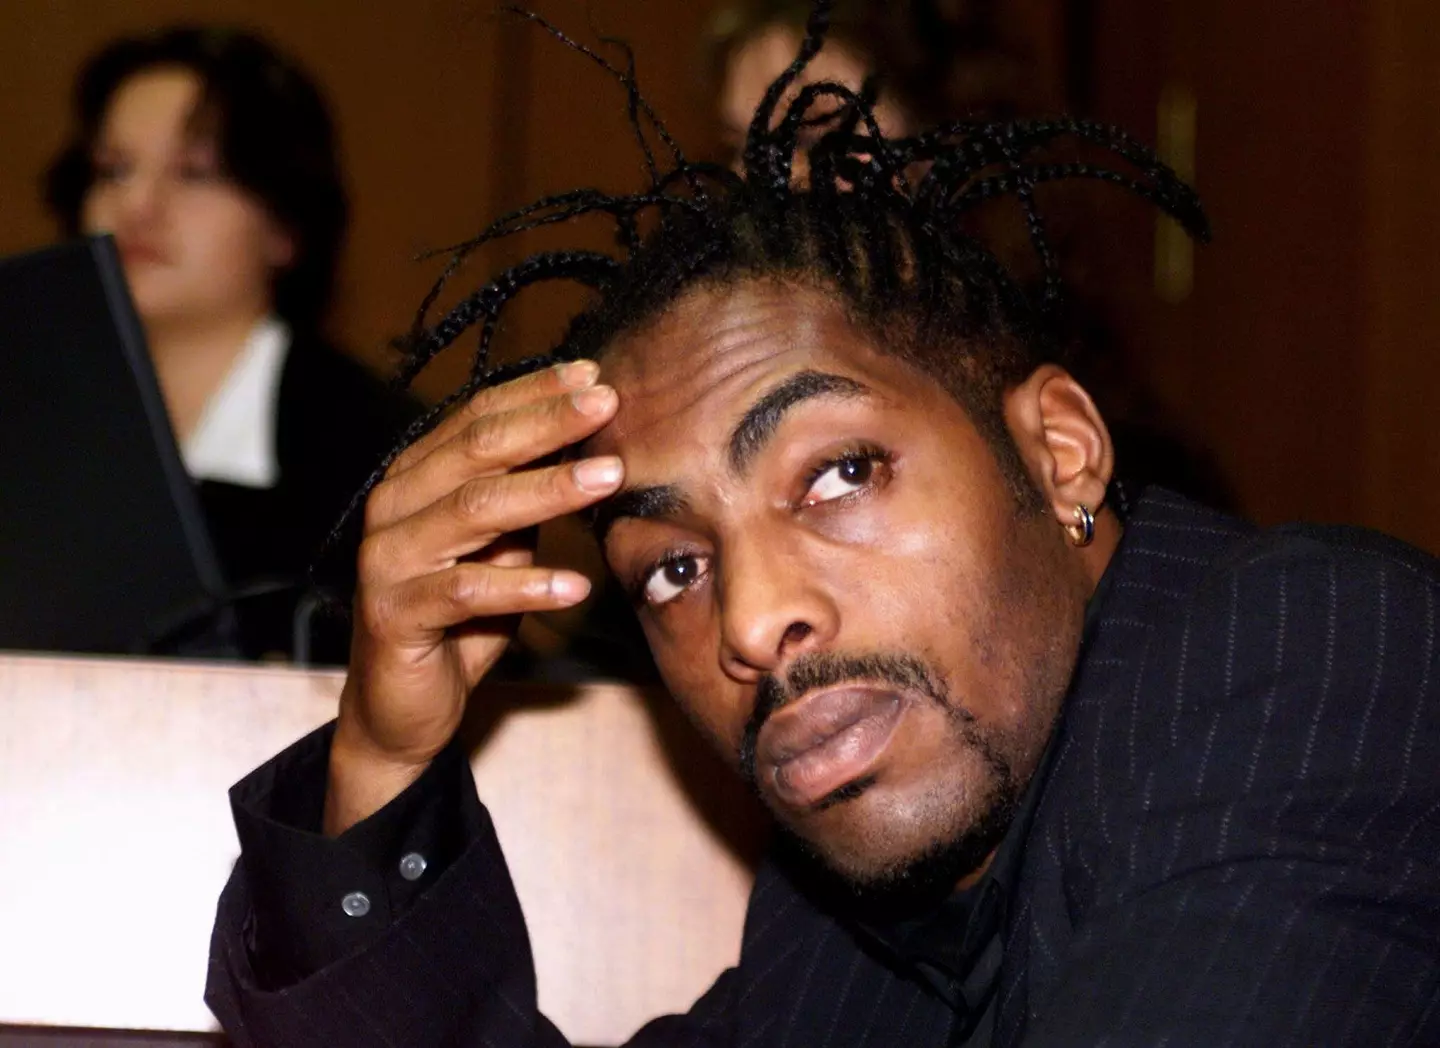 Coolio died aged 59.